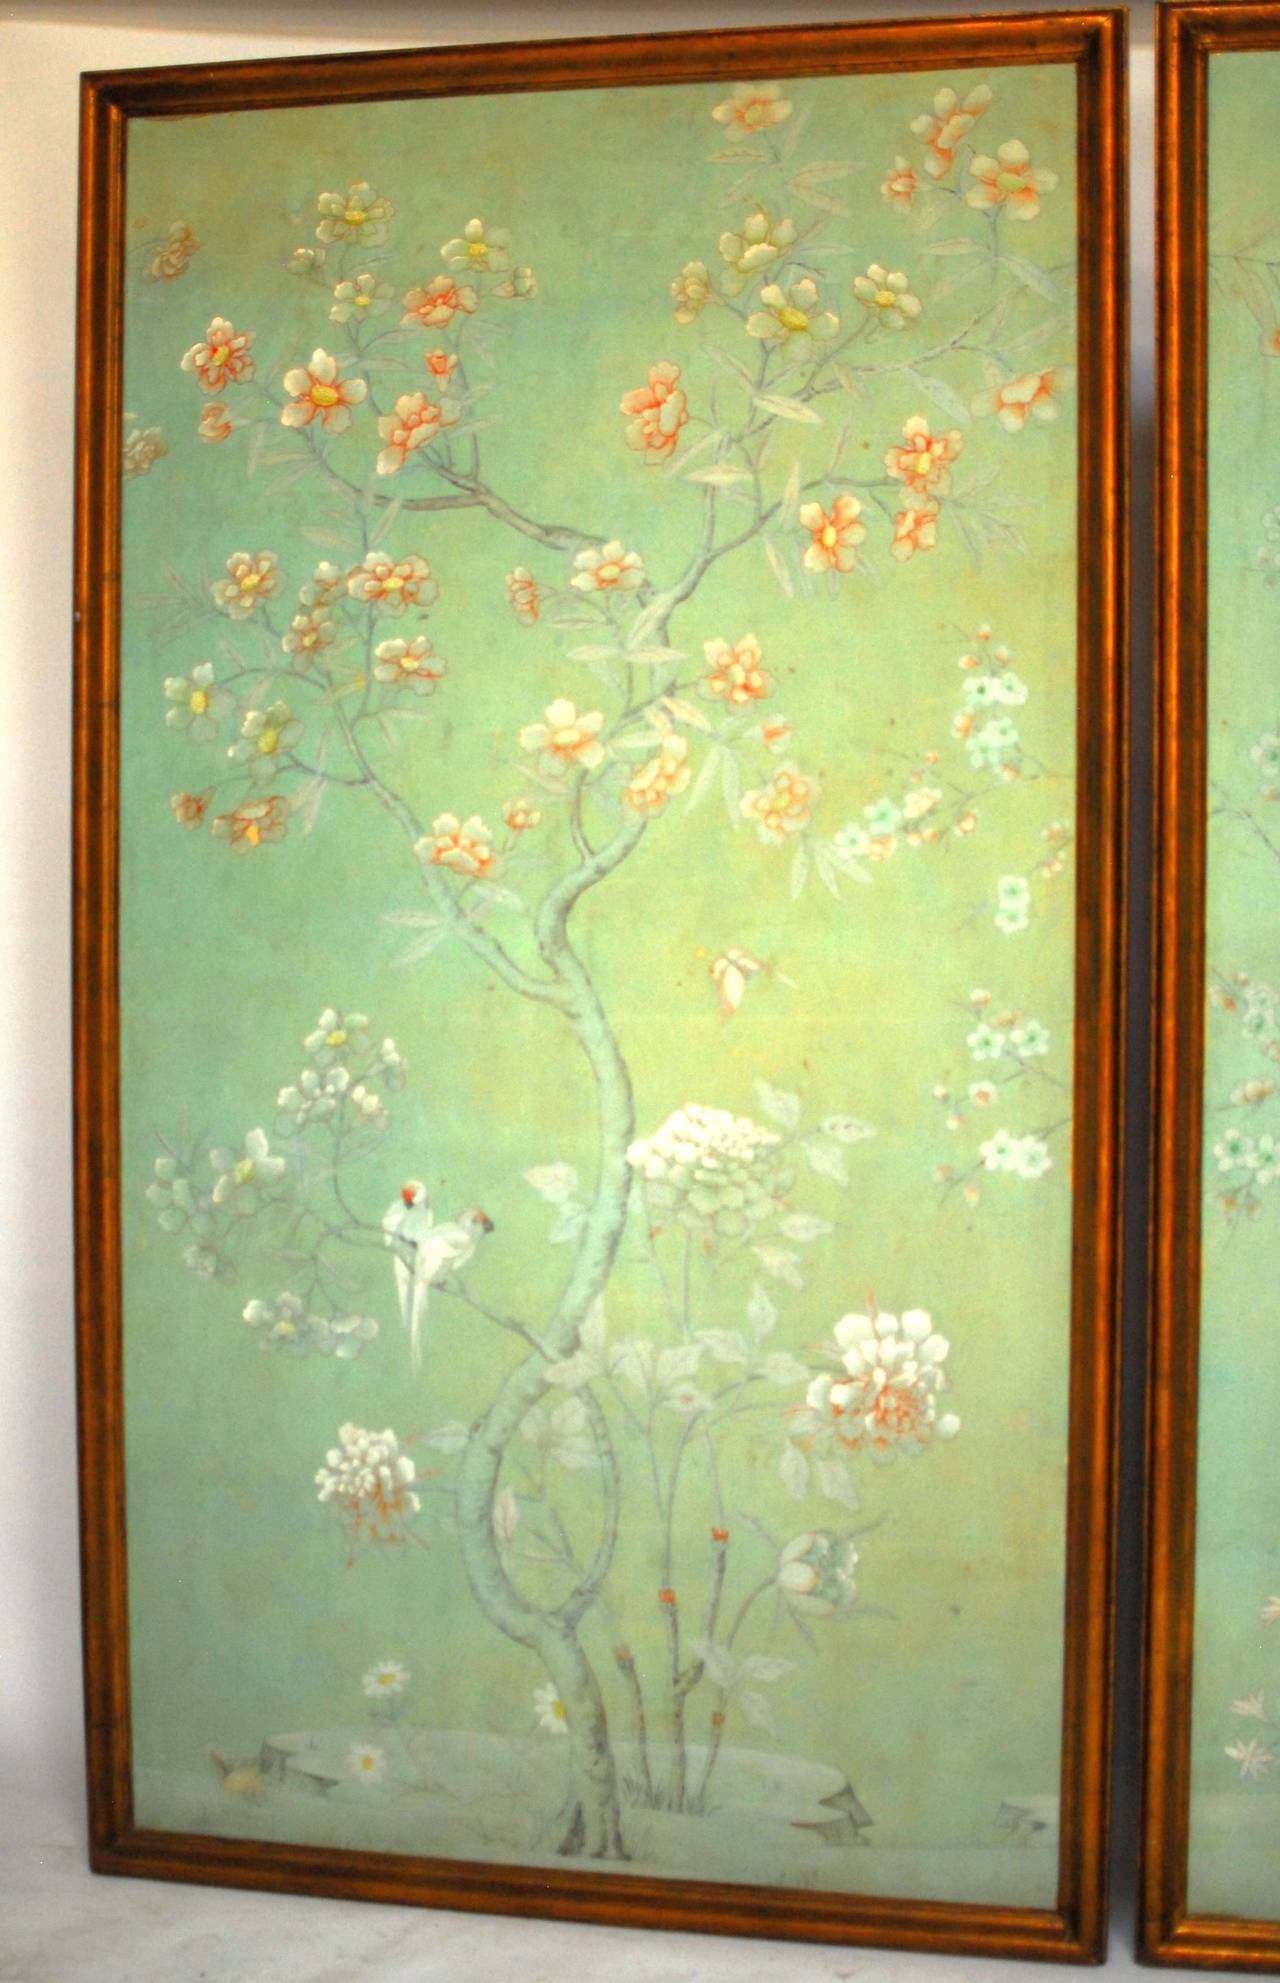 chinoiserie wallpaper panels,painting,modern art,botany,visual arts,picture frame